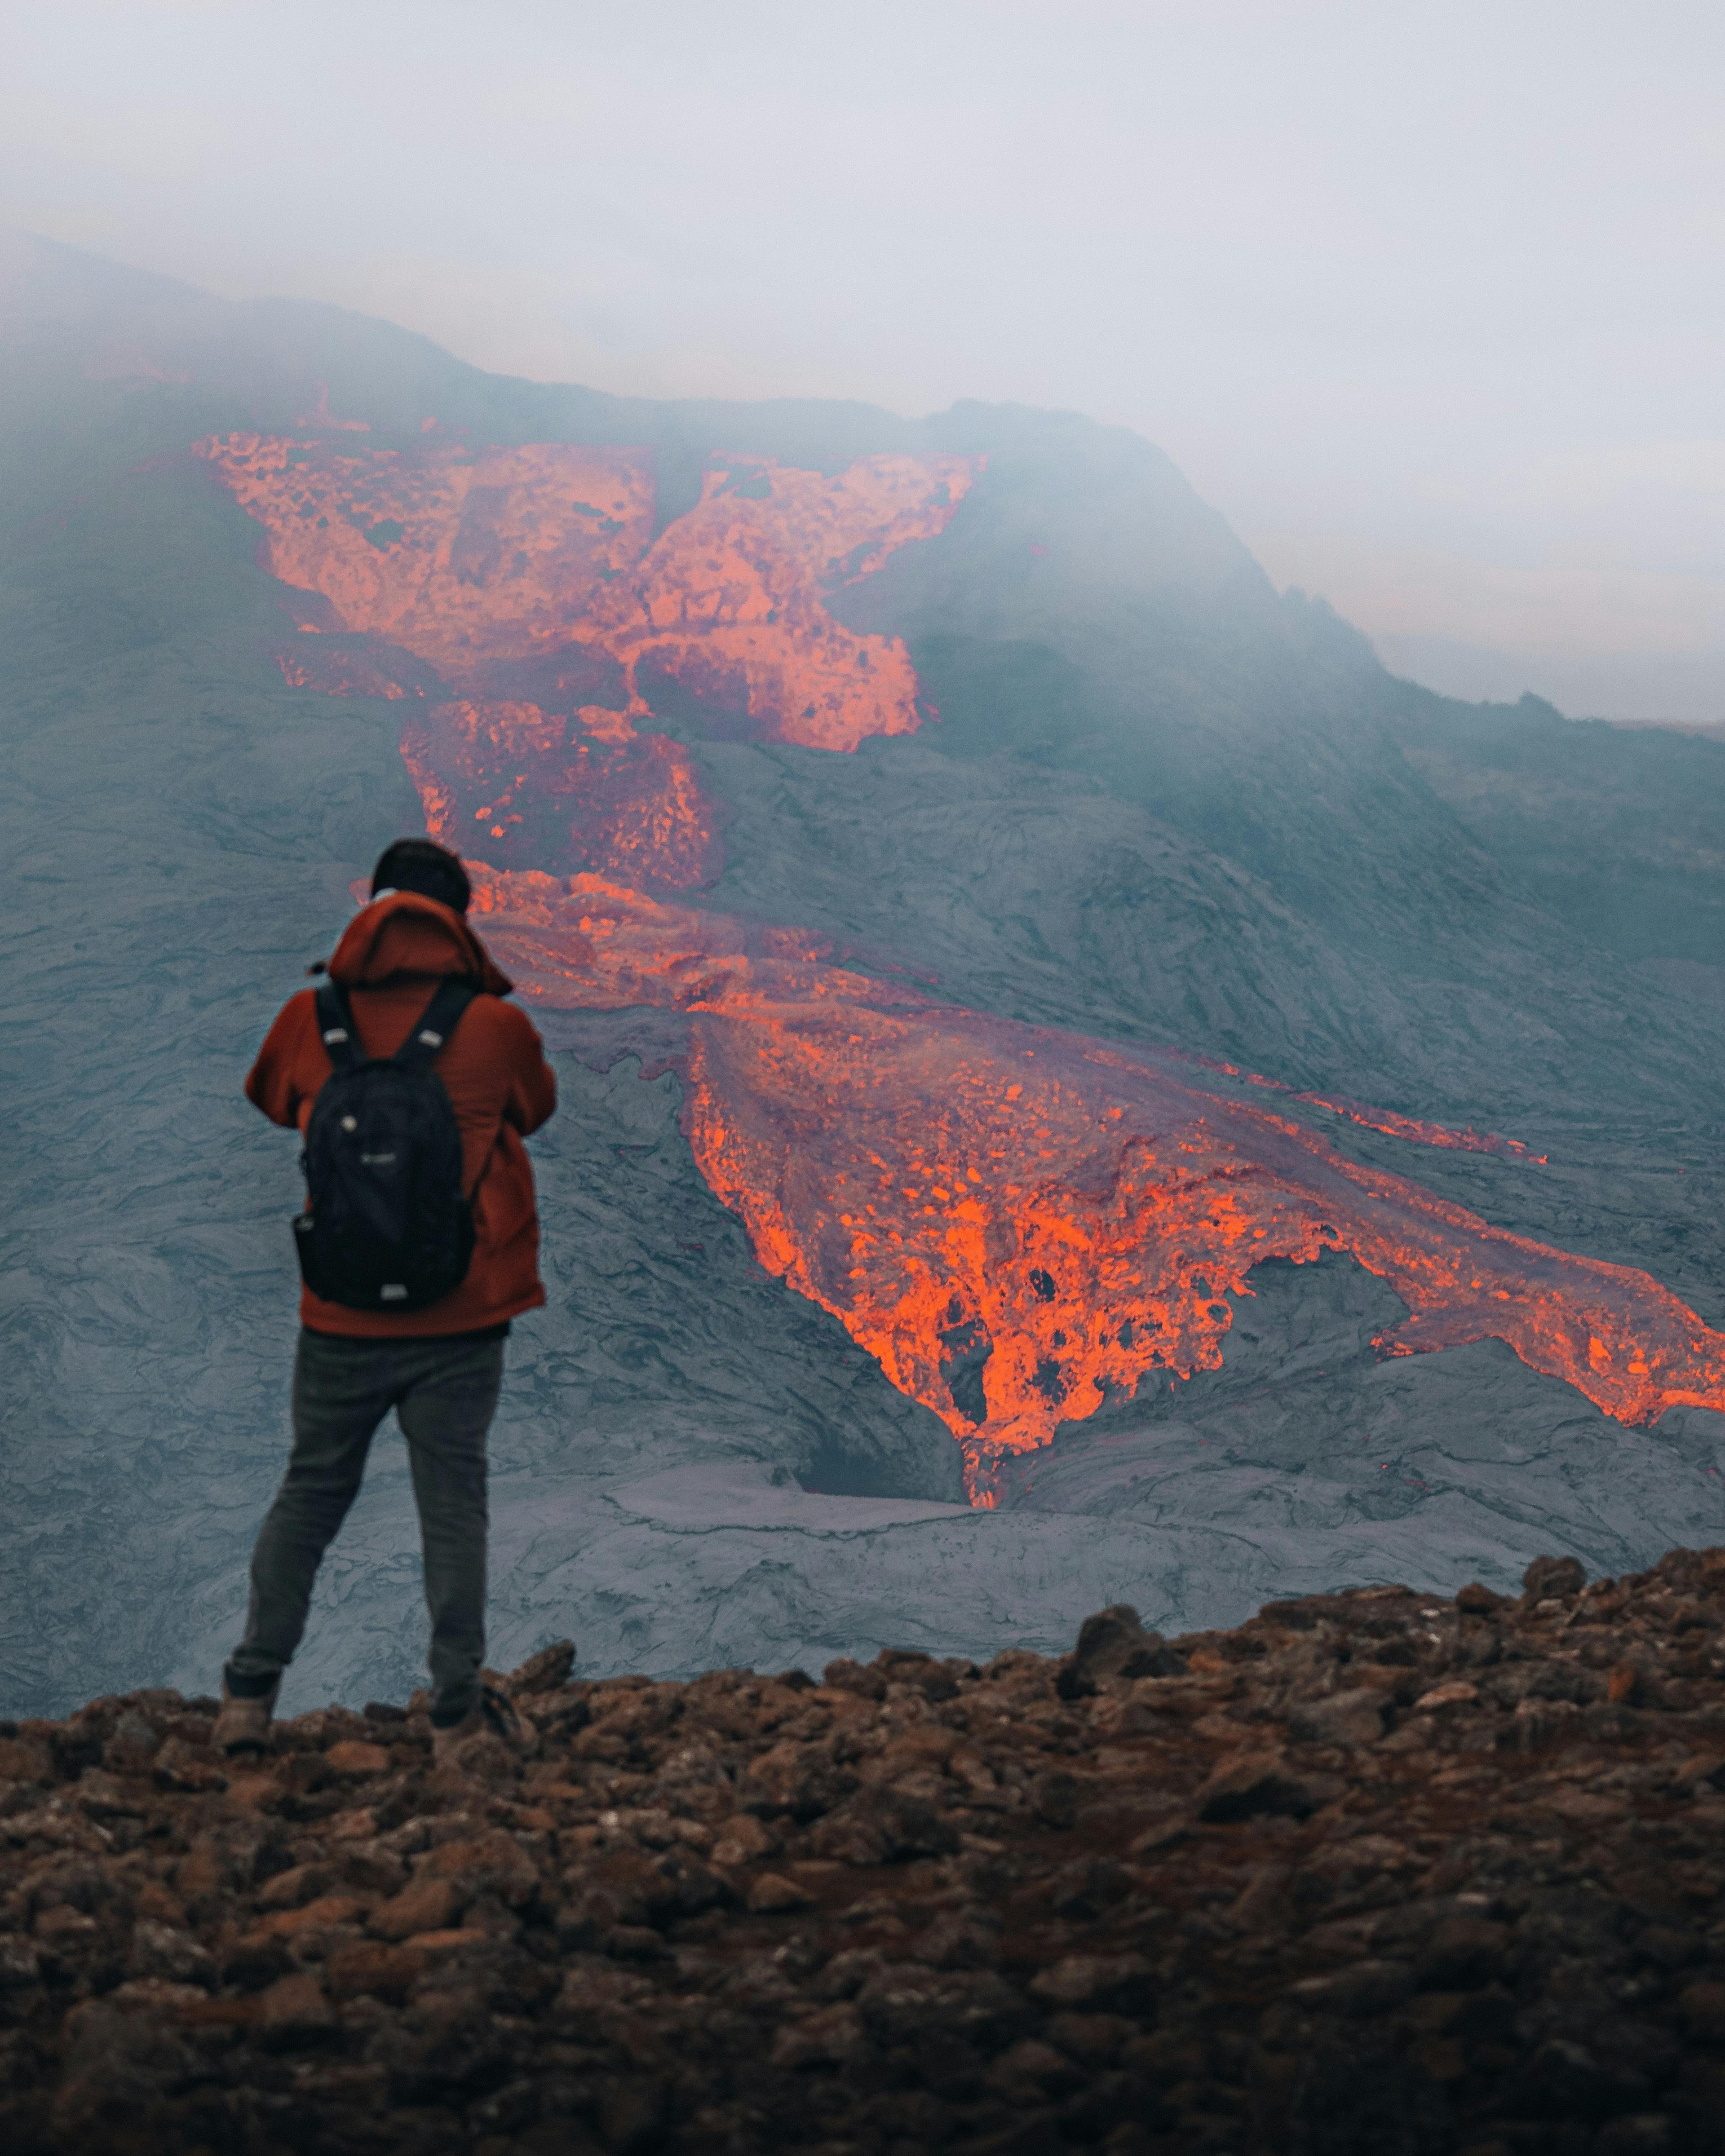 A lone observer clad in a red jacket stands transfixed by the raw beauty of an active lava flow at Fagradalsfjall, a stark contrast of fiery orange against the cooling blues of twilight.